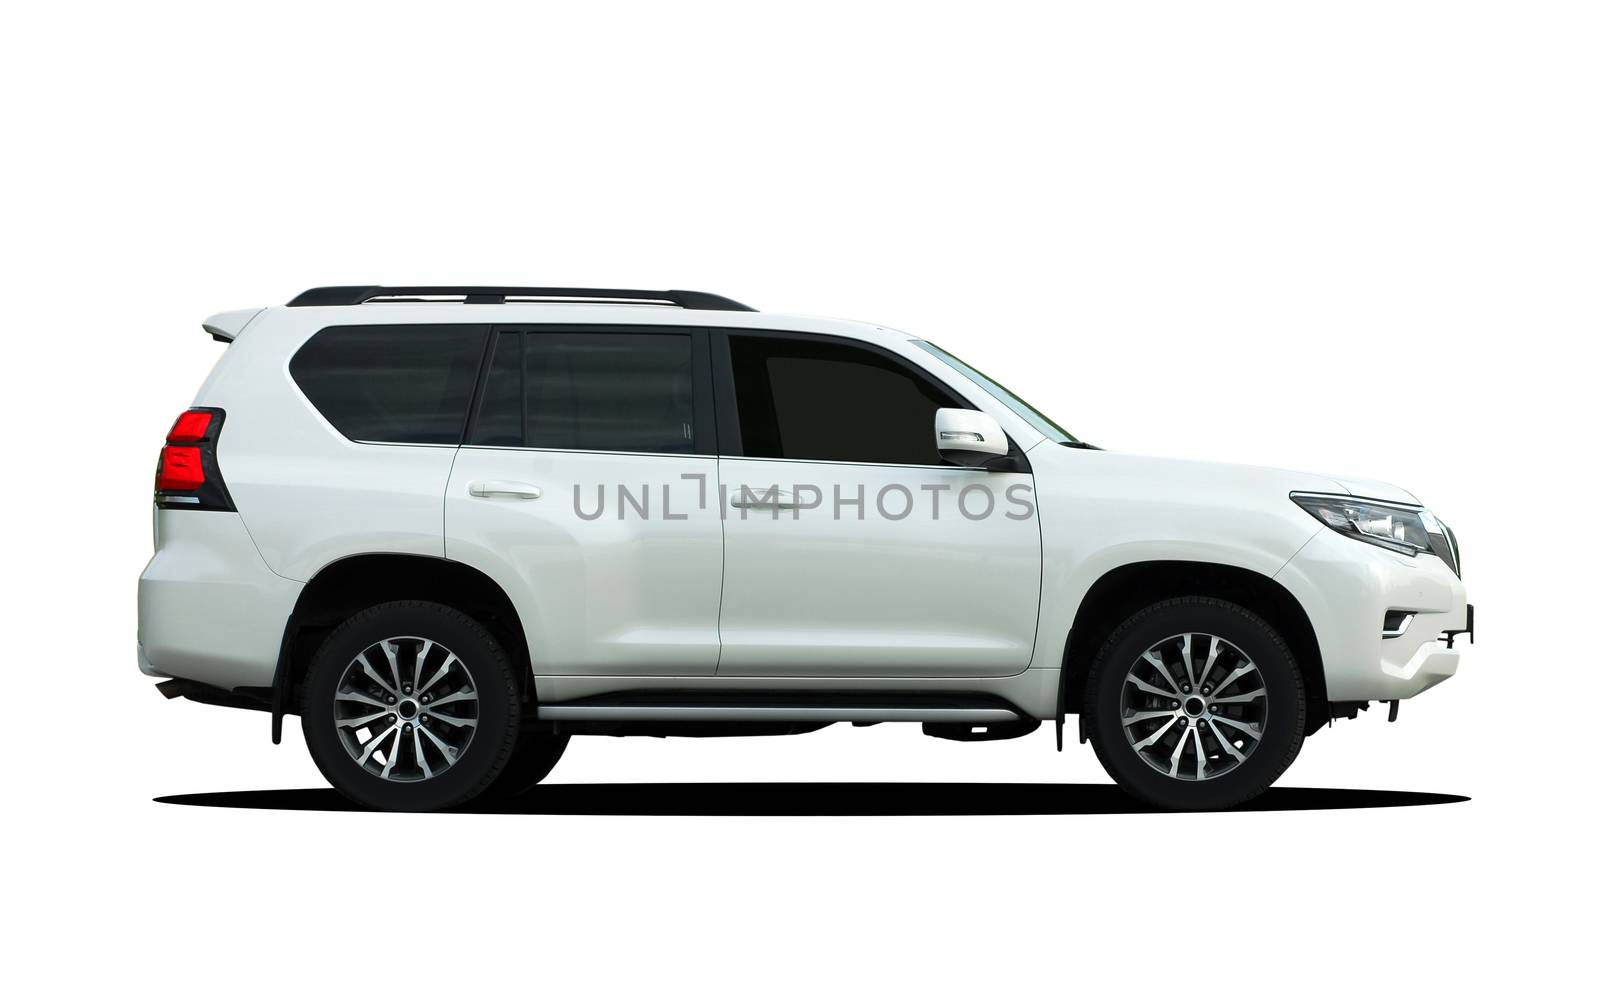 SUV on a white background by aselsa